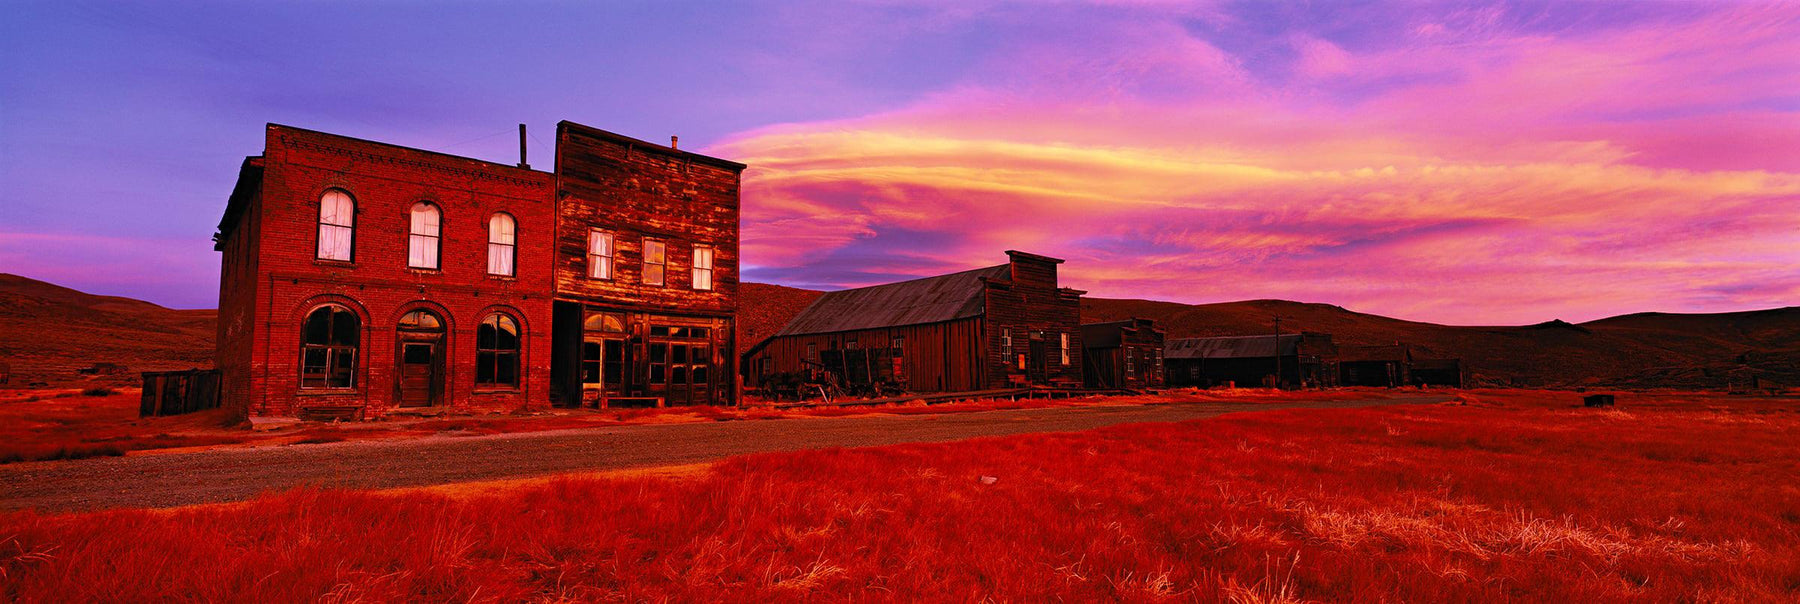 Bodie Ghost Town - Fine Art Photograph by Peter Lik